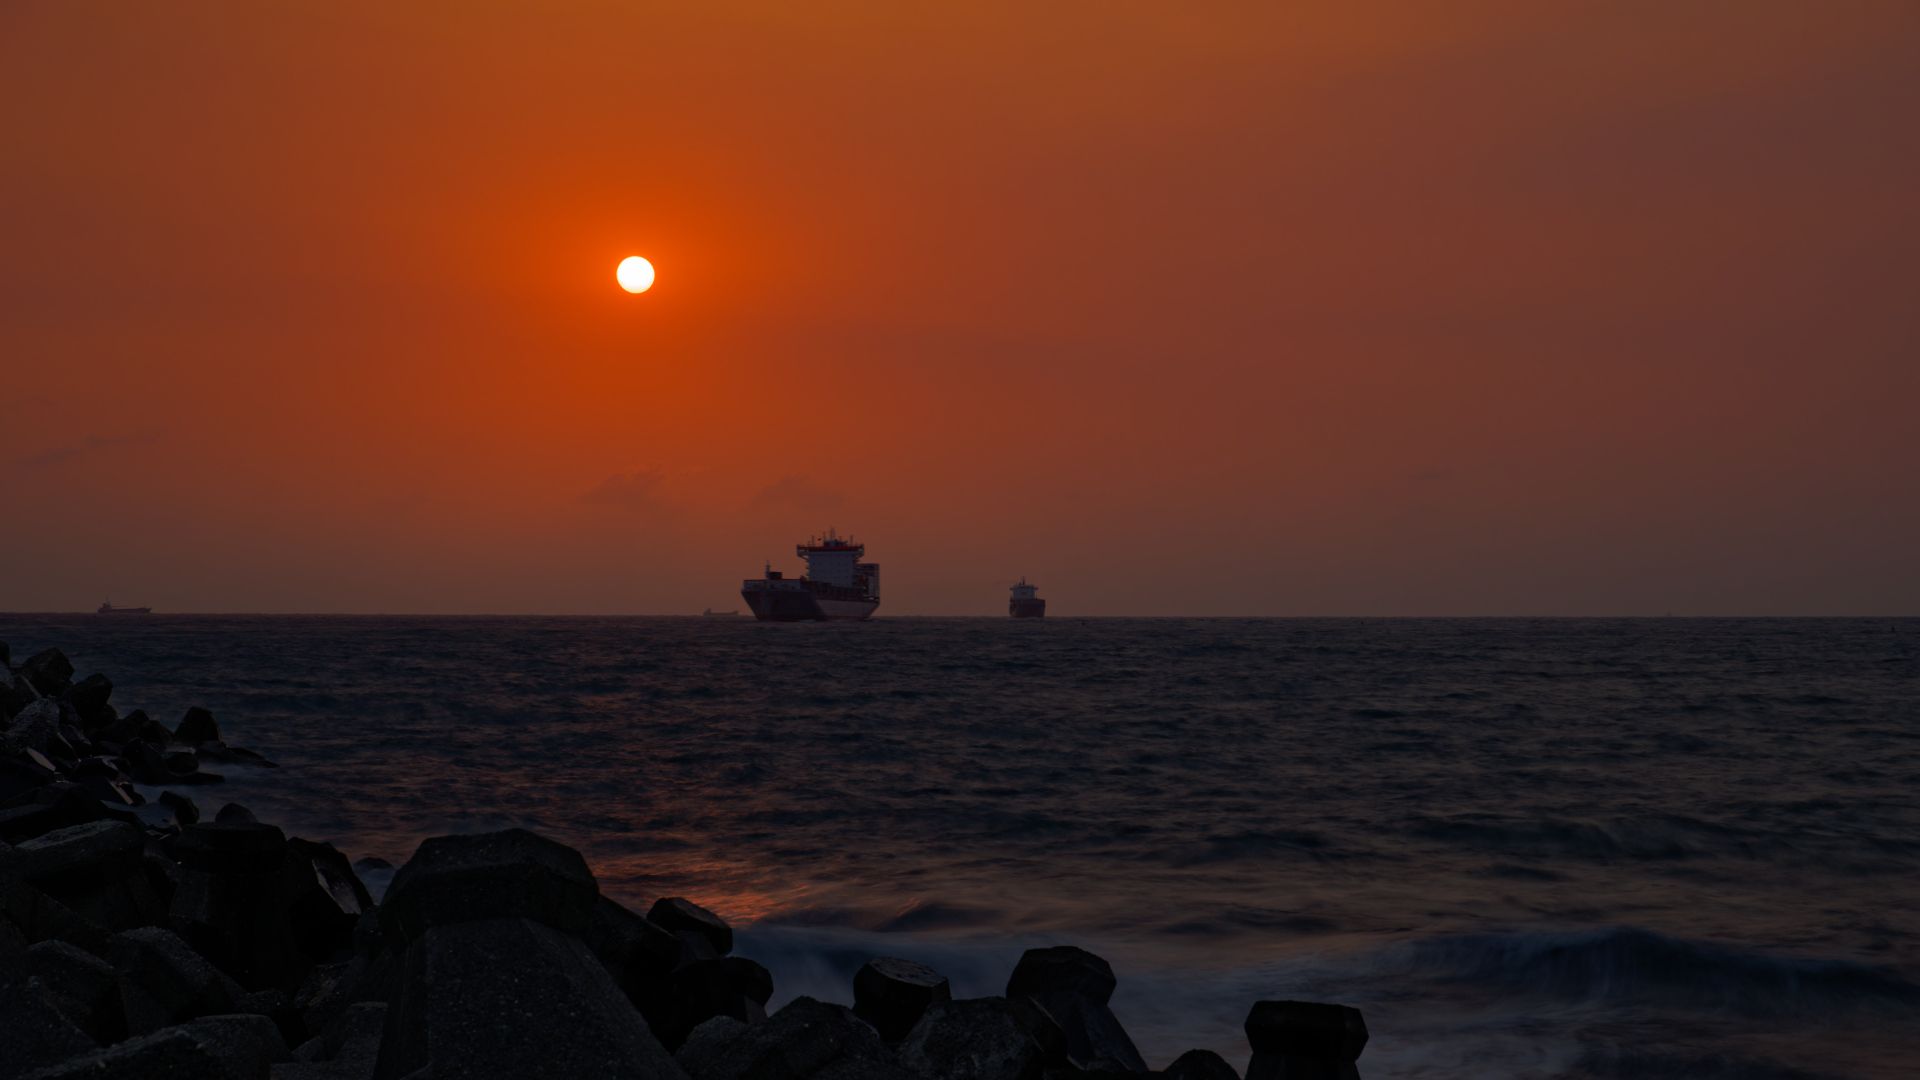 Cargo ships entering Kaohsiung Harbor in front of the setting sun. The rocks of a breakwater are visible in the foreground.